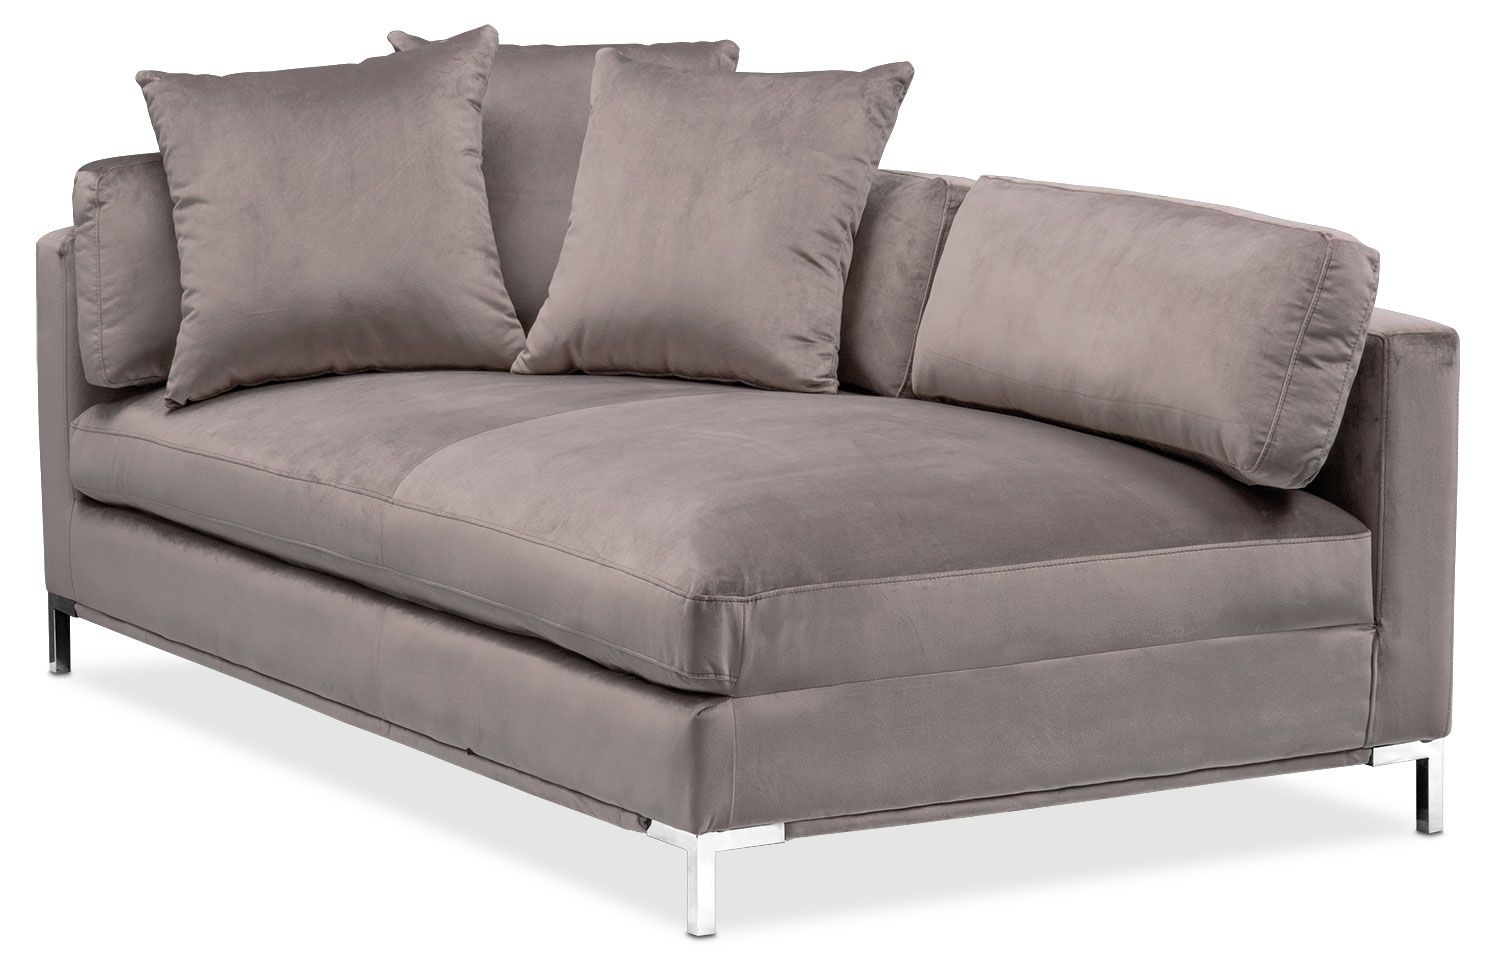 Moda 3 Piece Sectional With Left Facing Chaise – Oyster | Value City Within Nico Grey Sectionals With Left Facing Storage Chaise (View 16 of 30)